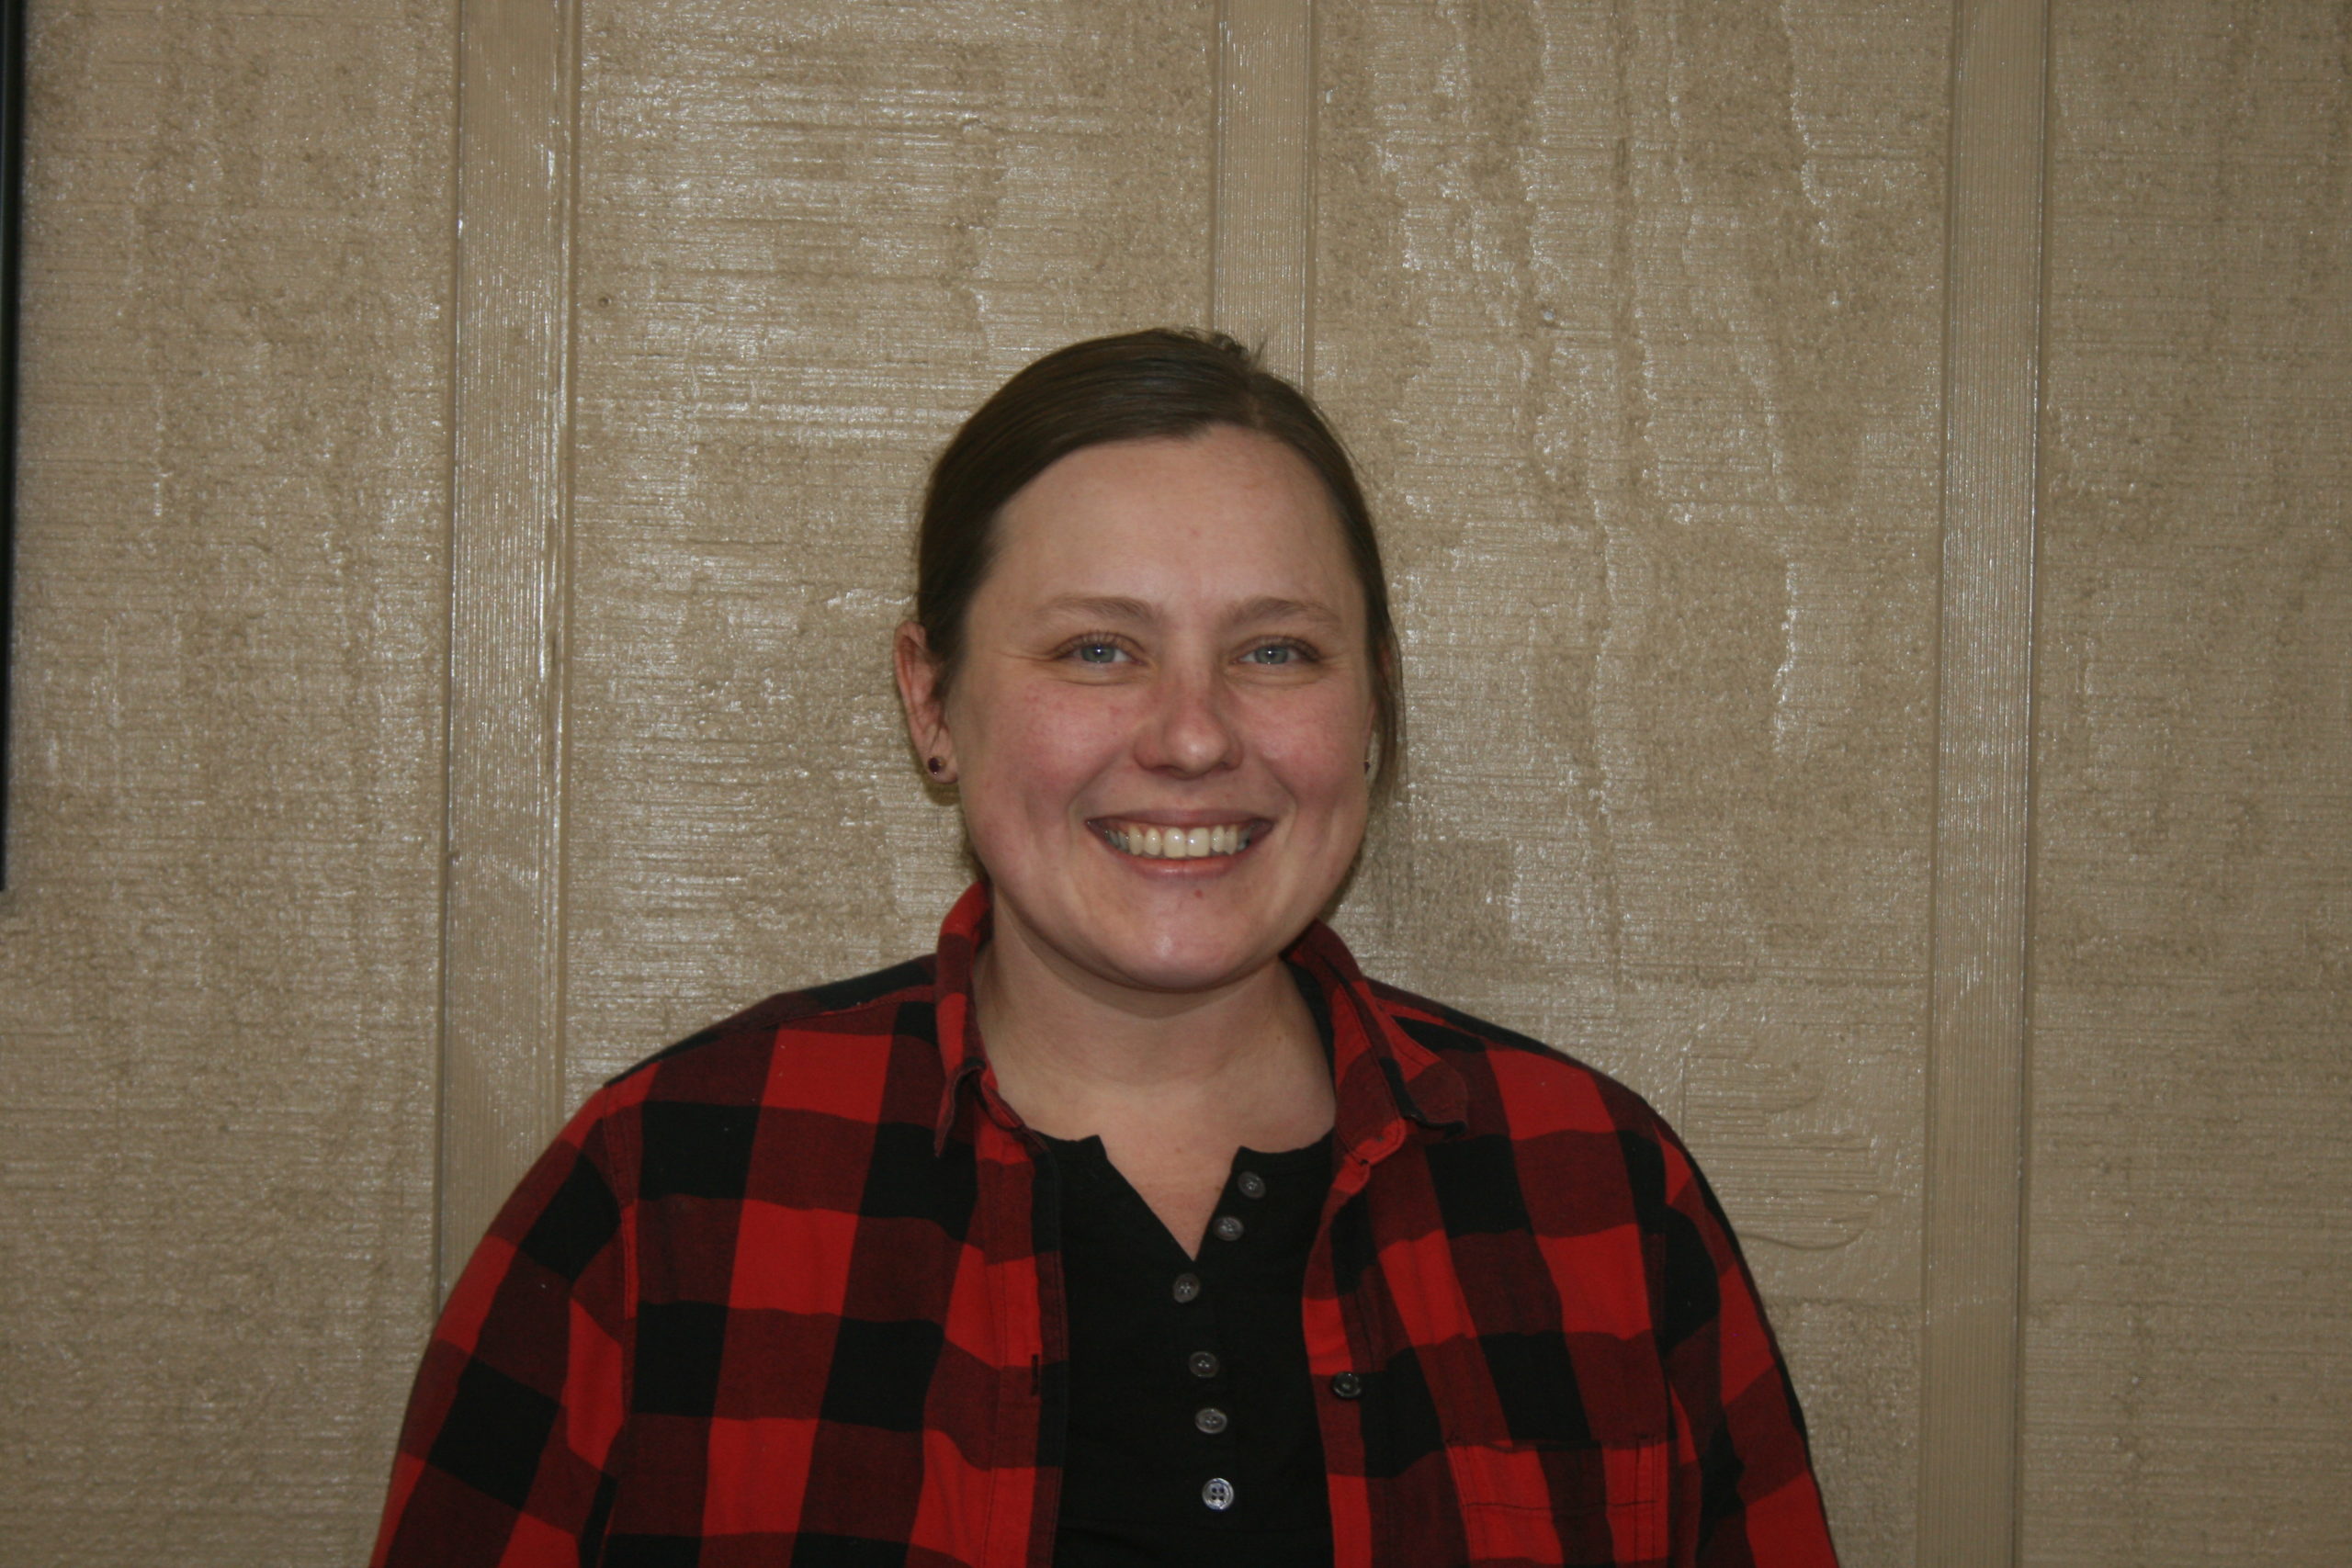 A woman in a red and black plaid shirt smiling